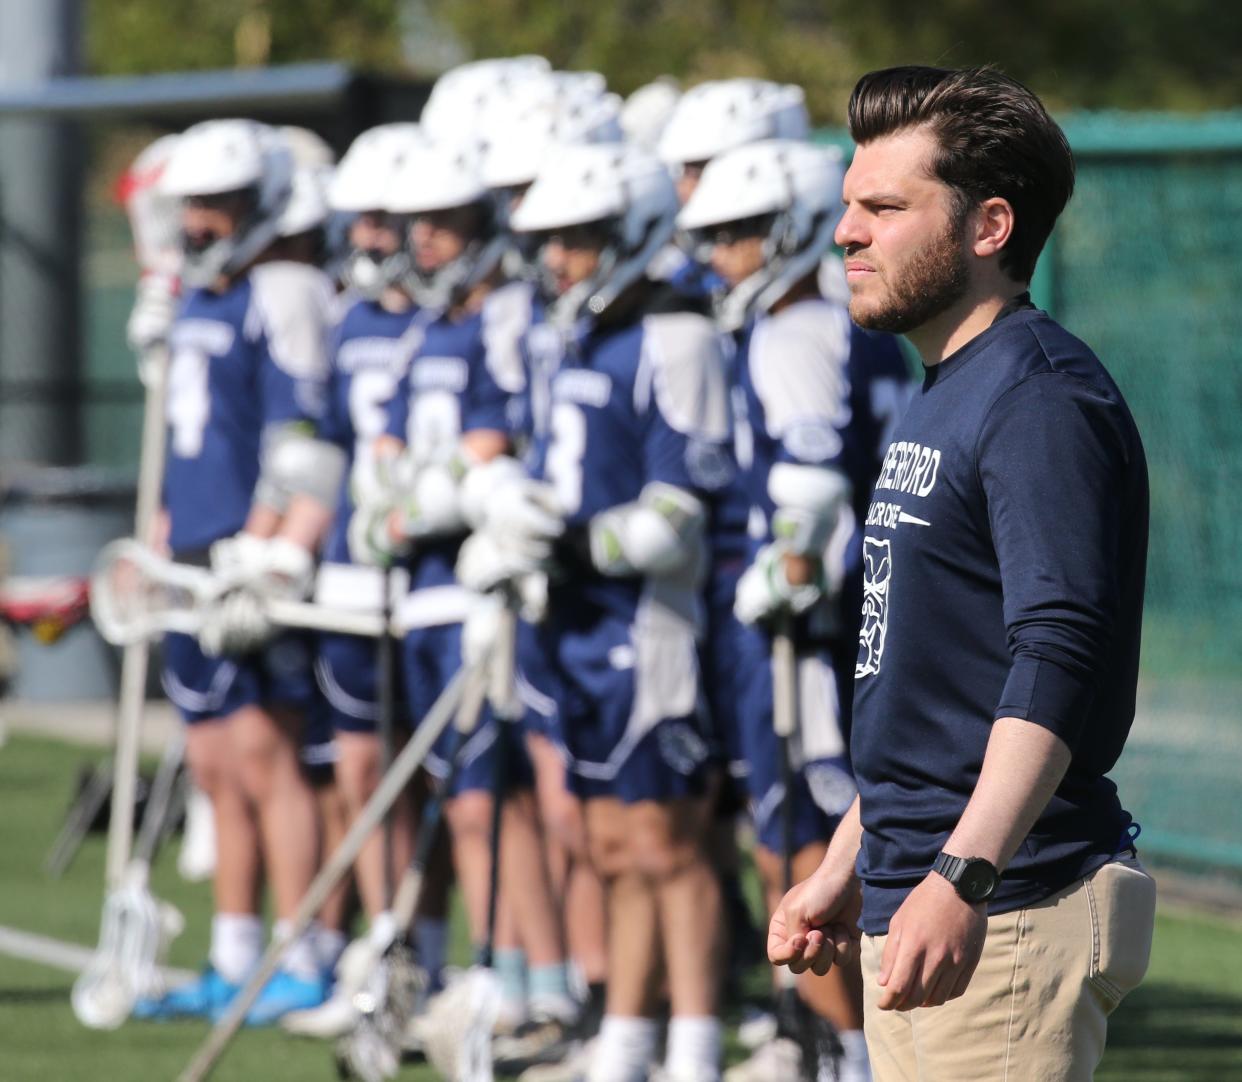 Rutherford boys lacrosse head coach Michael Foster on the sidelines as his team played at Nutley on April 28, 2022.